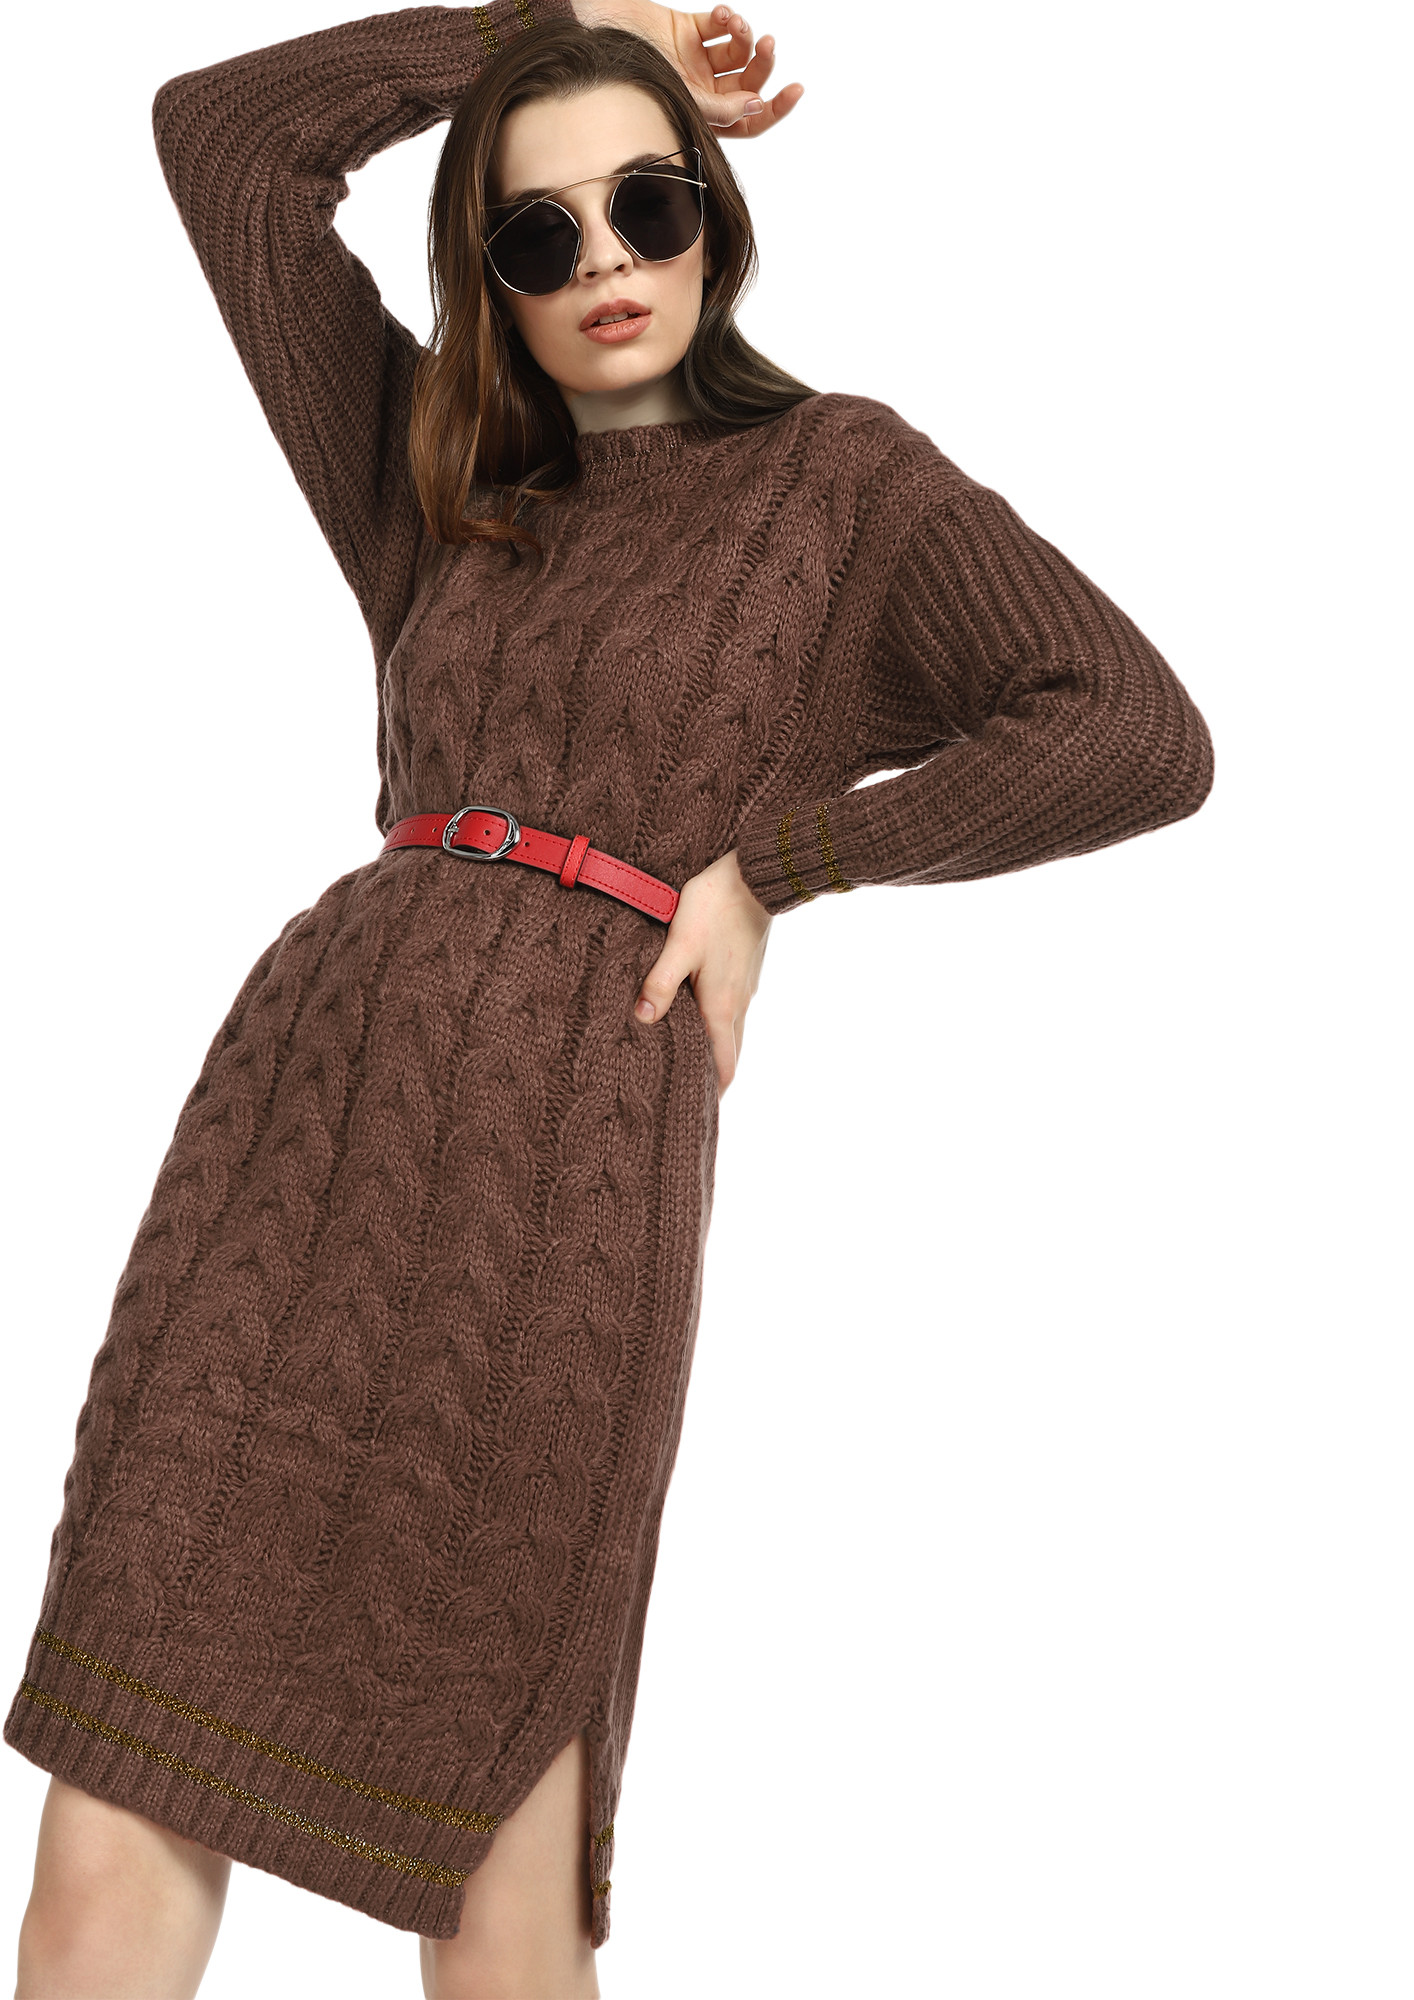 WINTER GAME RULES BROWN KNIT DRESS